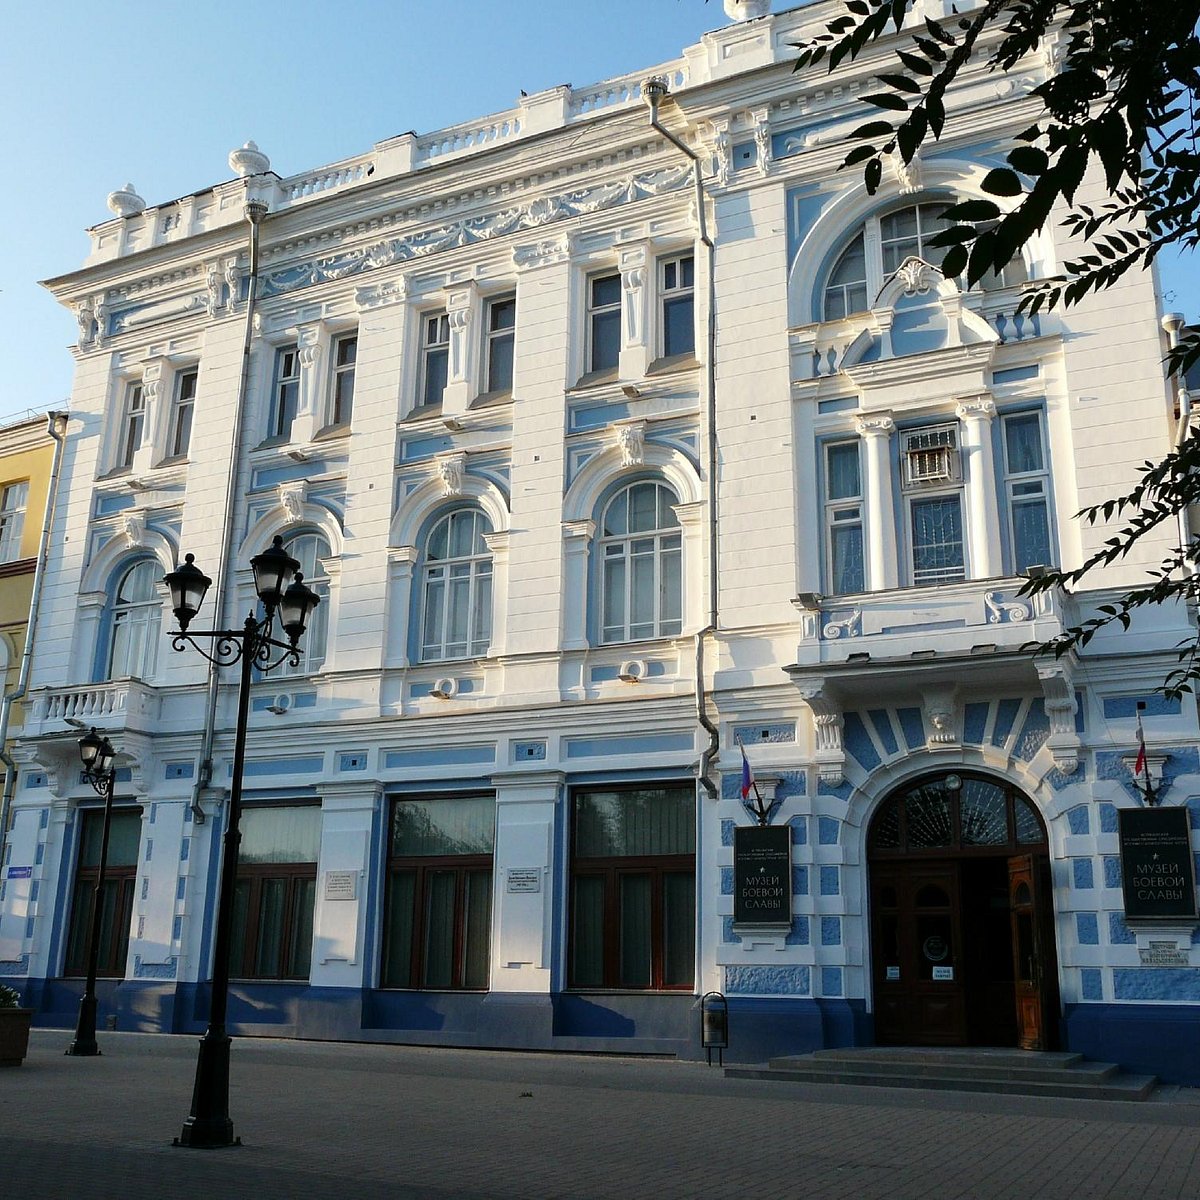 Museum of Military Glory, Astrakhan